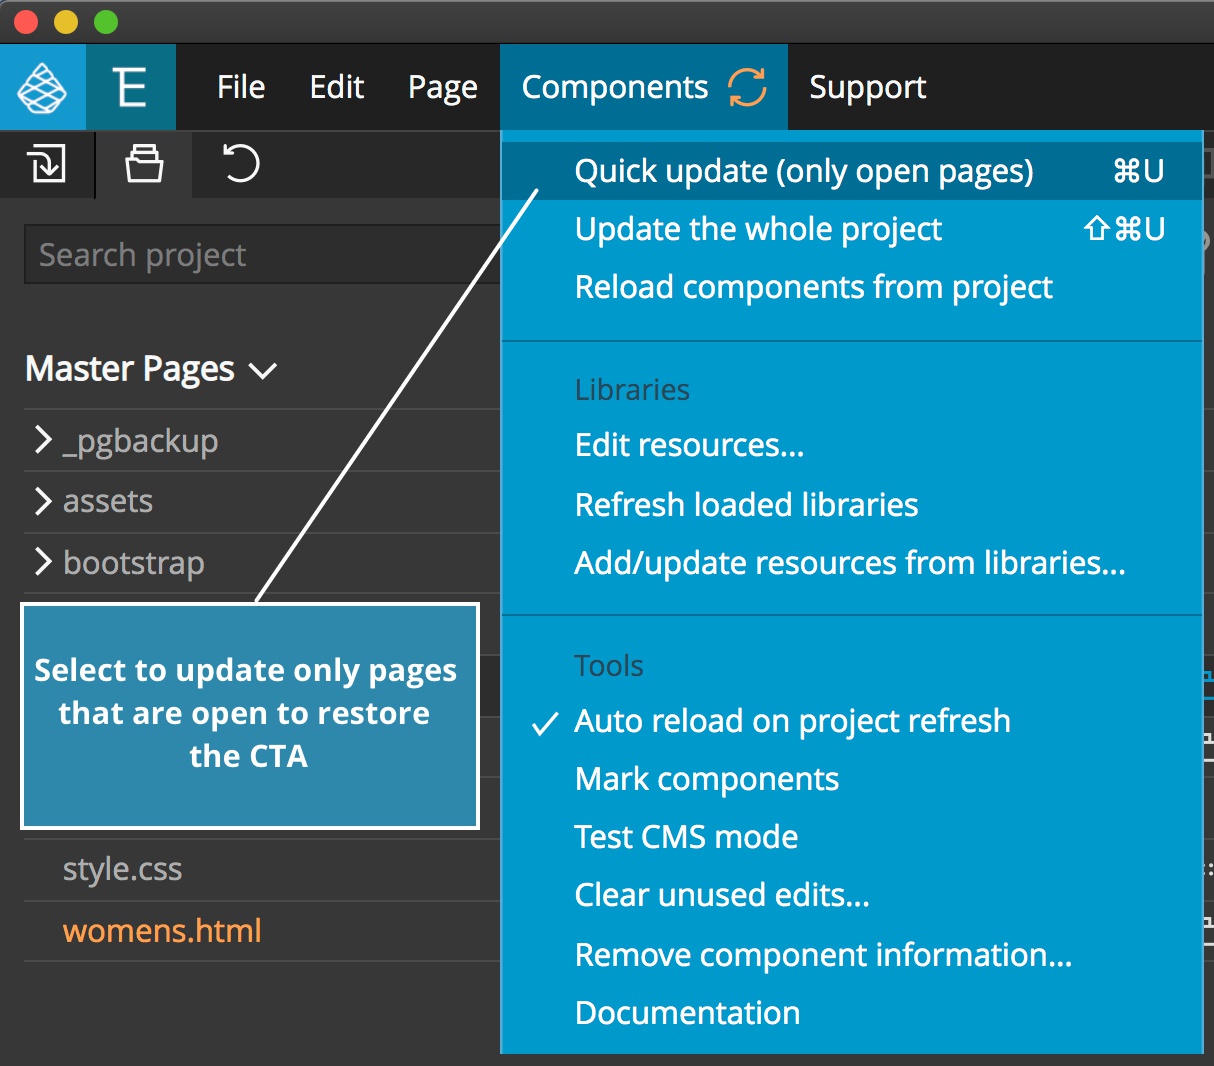 Screenshot of the Component open pages update menu